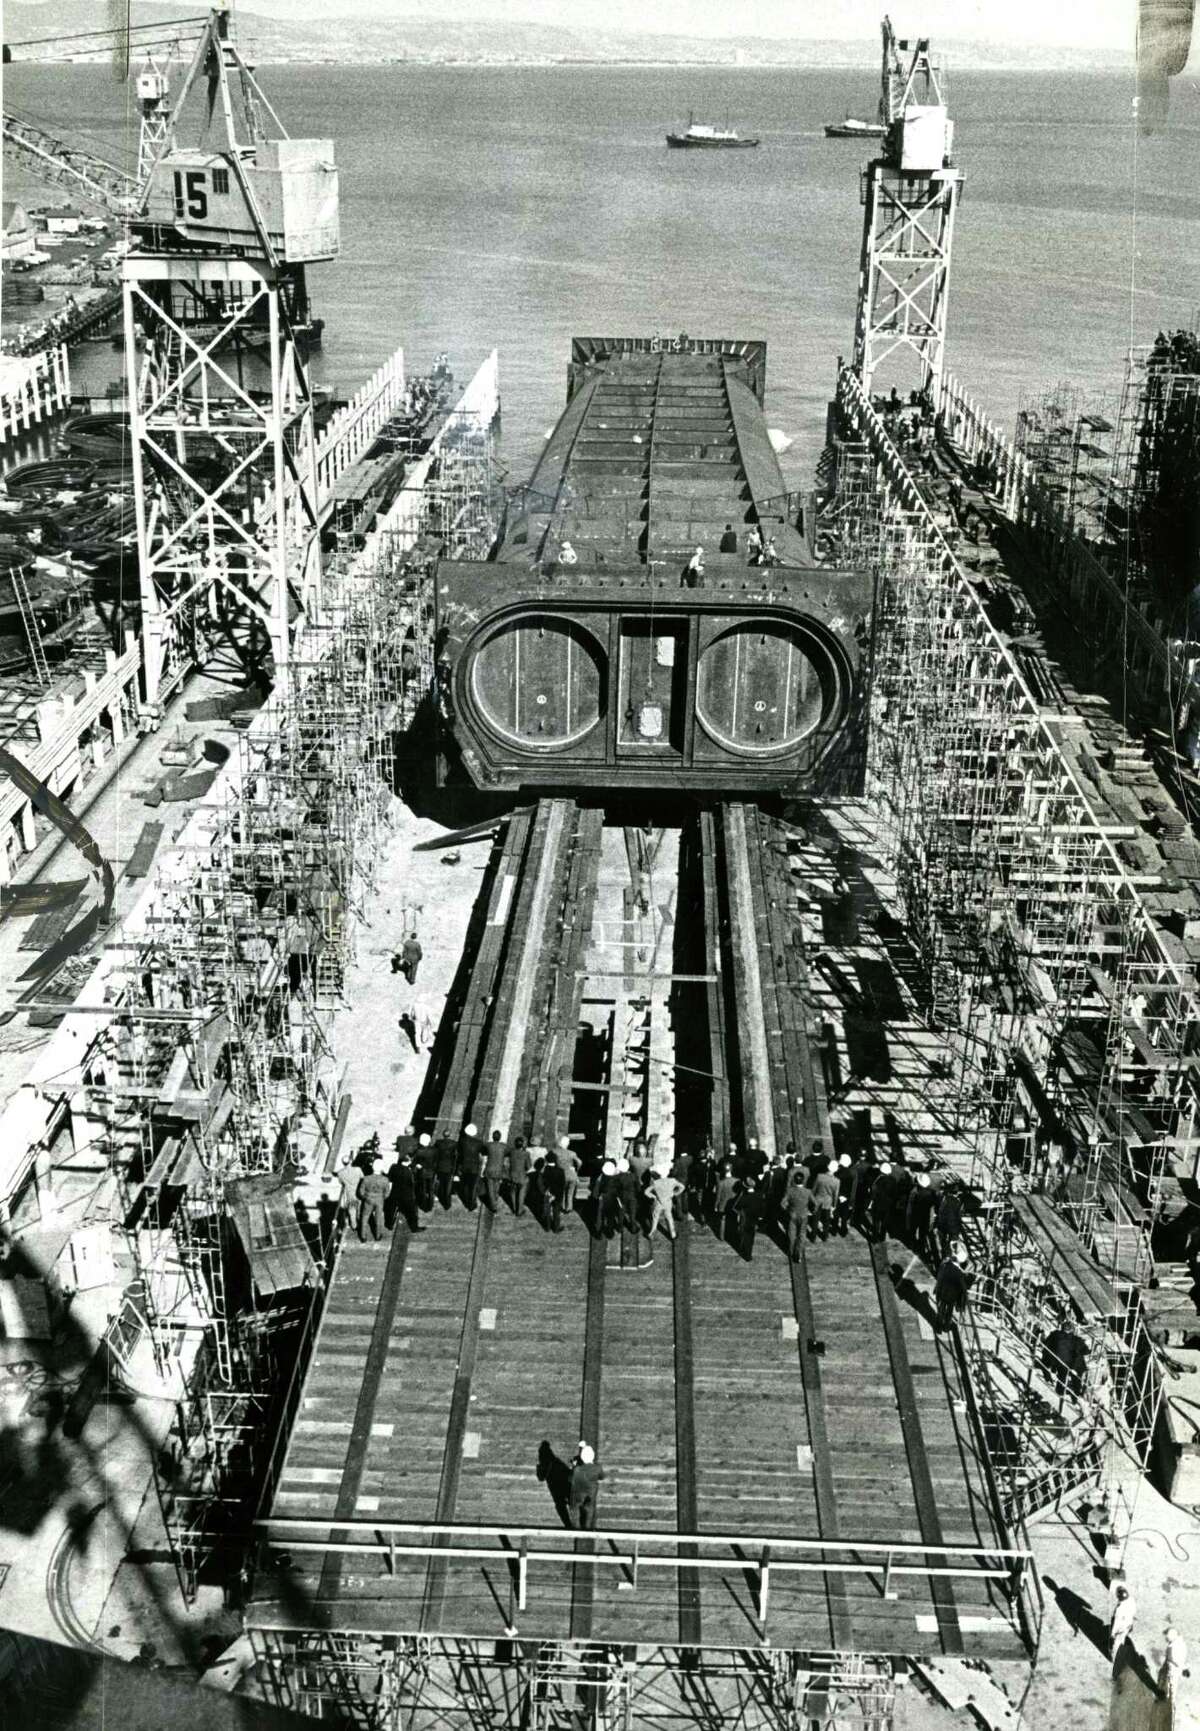 Sept. 7, 1966: A BART Transbay Tube segment built by Bethlehem Steel in San Francisco slides into the Bay. The transit agency used a 57 segments to build the underwater tube.